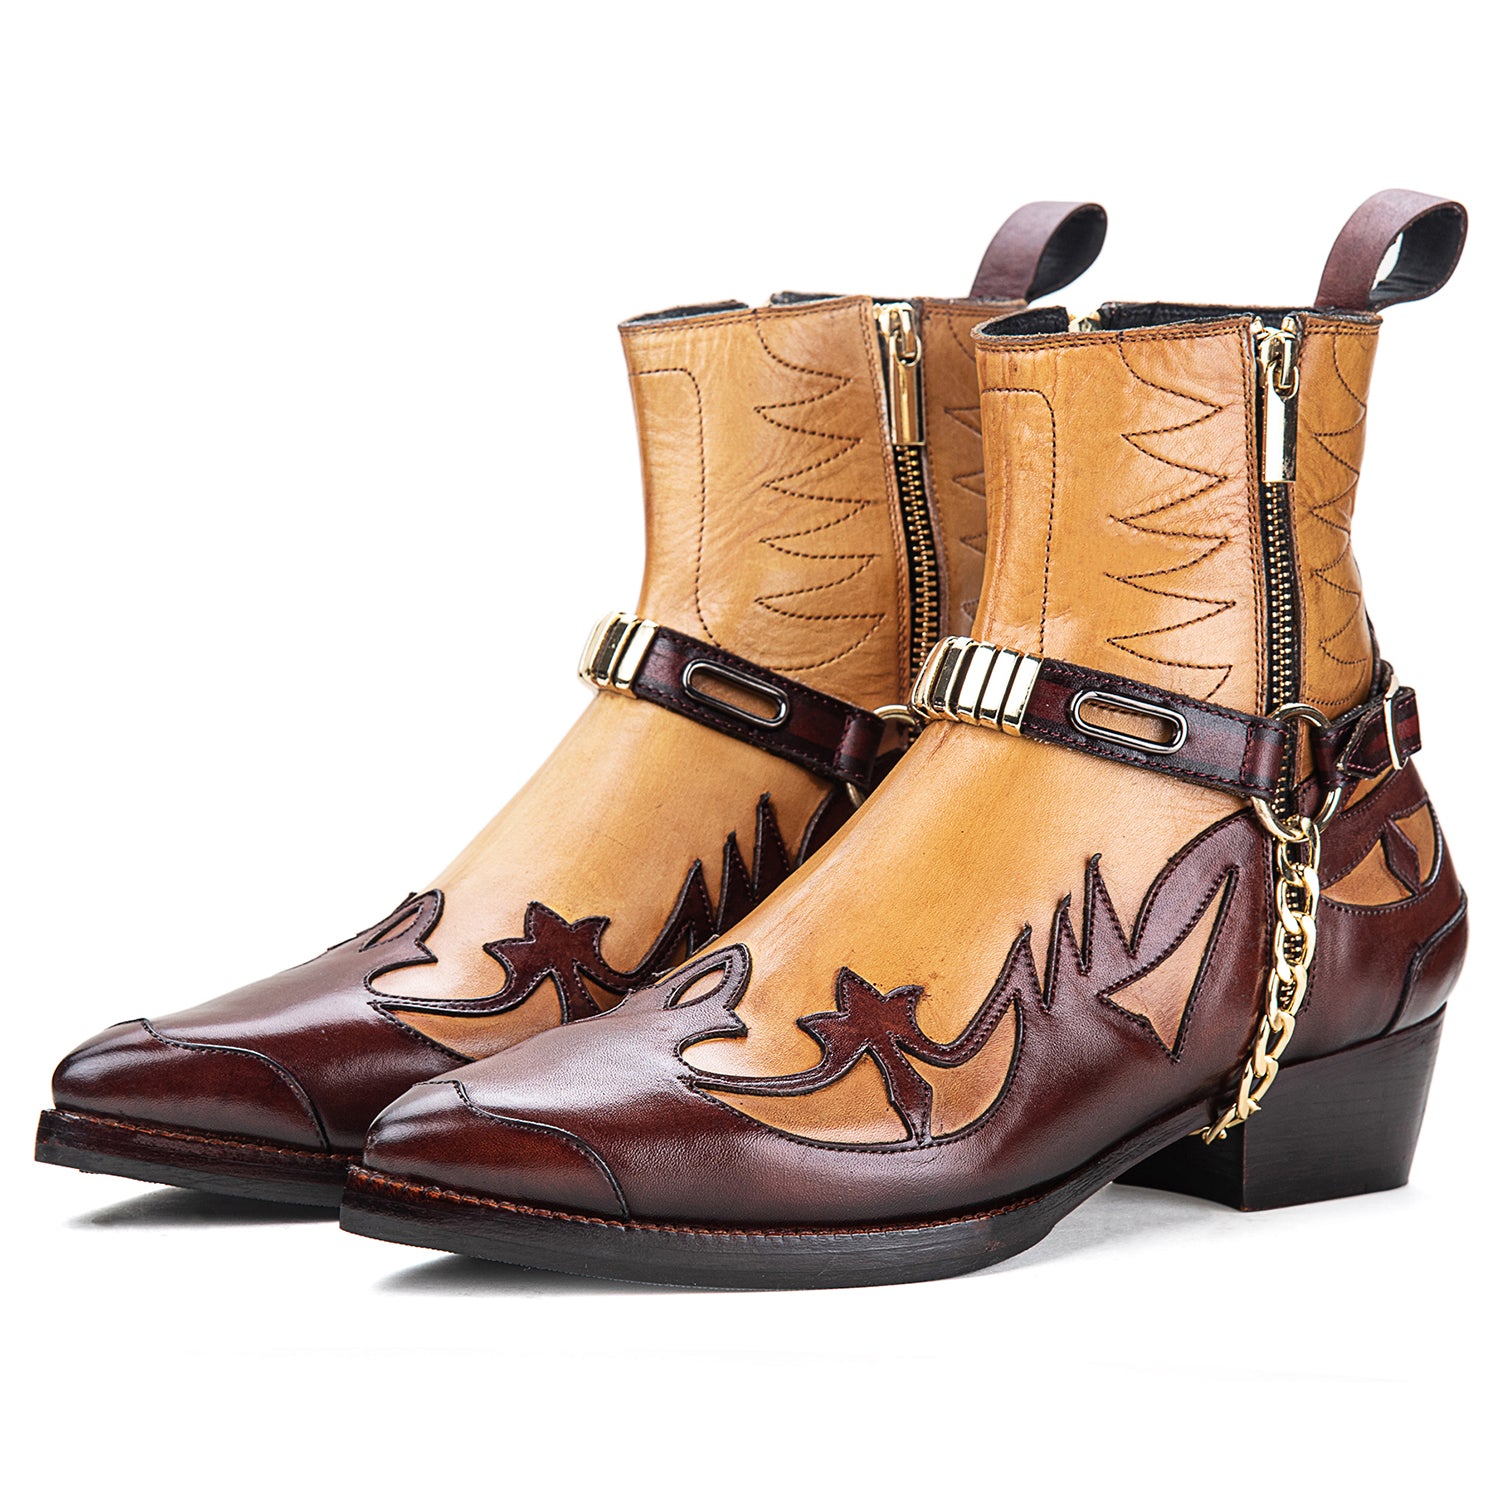 Lethato Men's Harness Boots